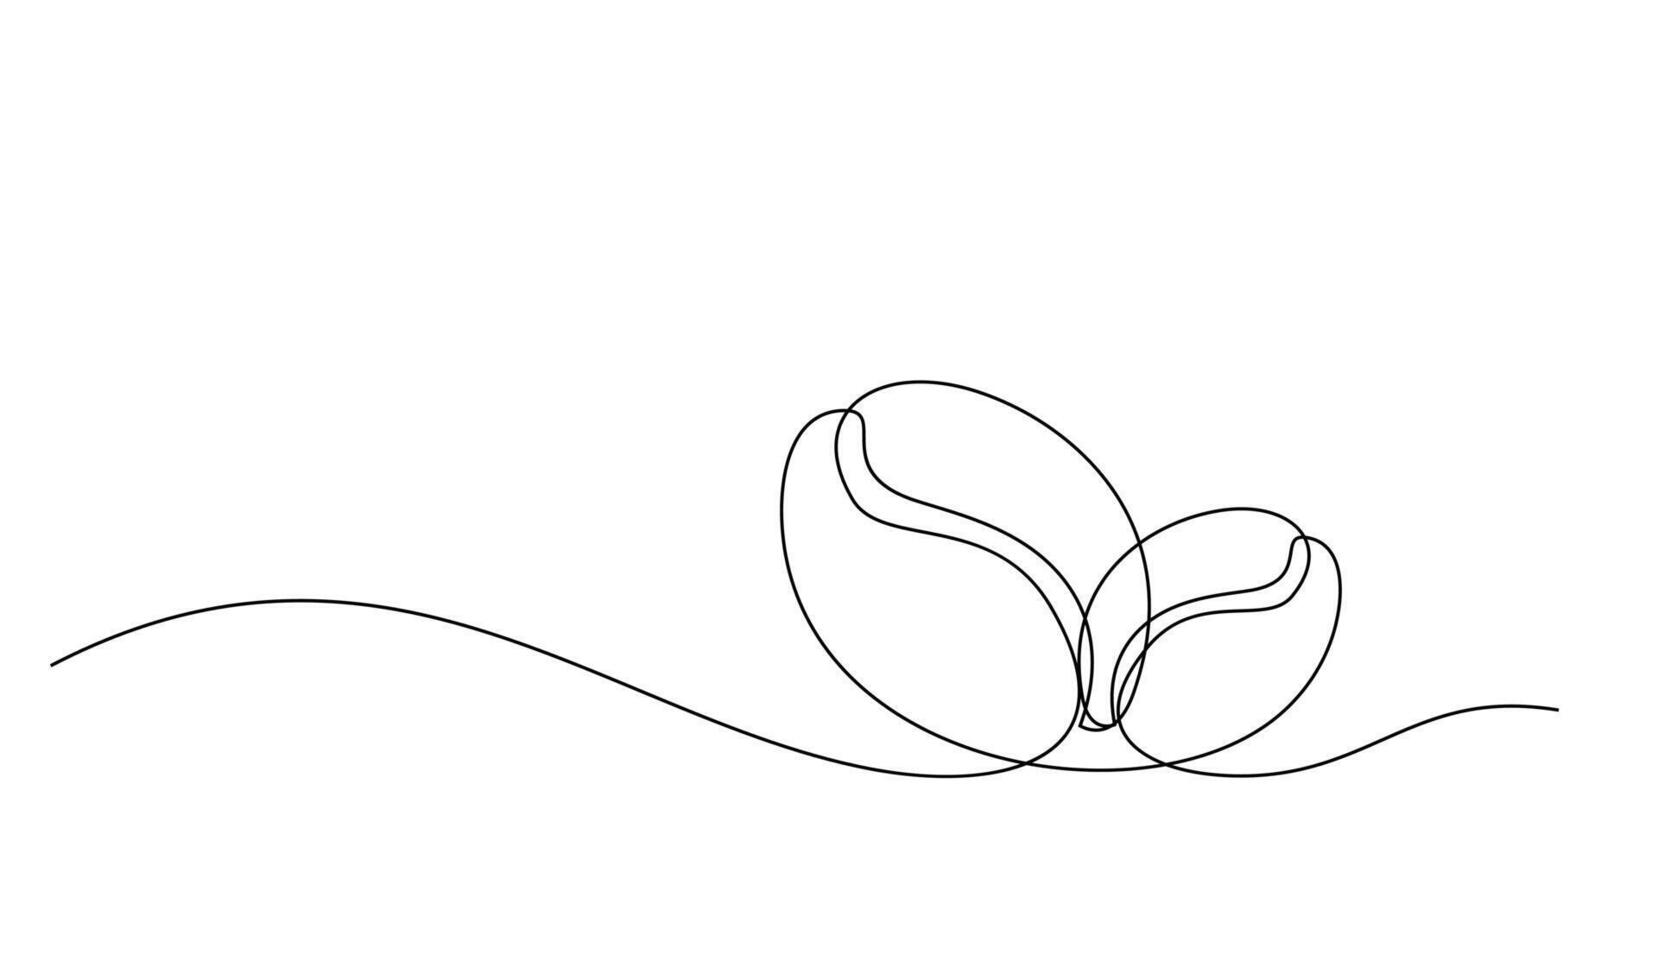 Linear coffee grain background. One continuous line drawing of a coffee bean vector